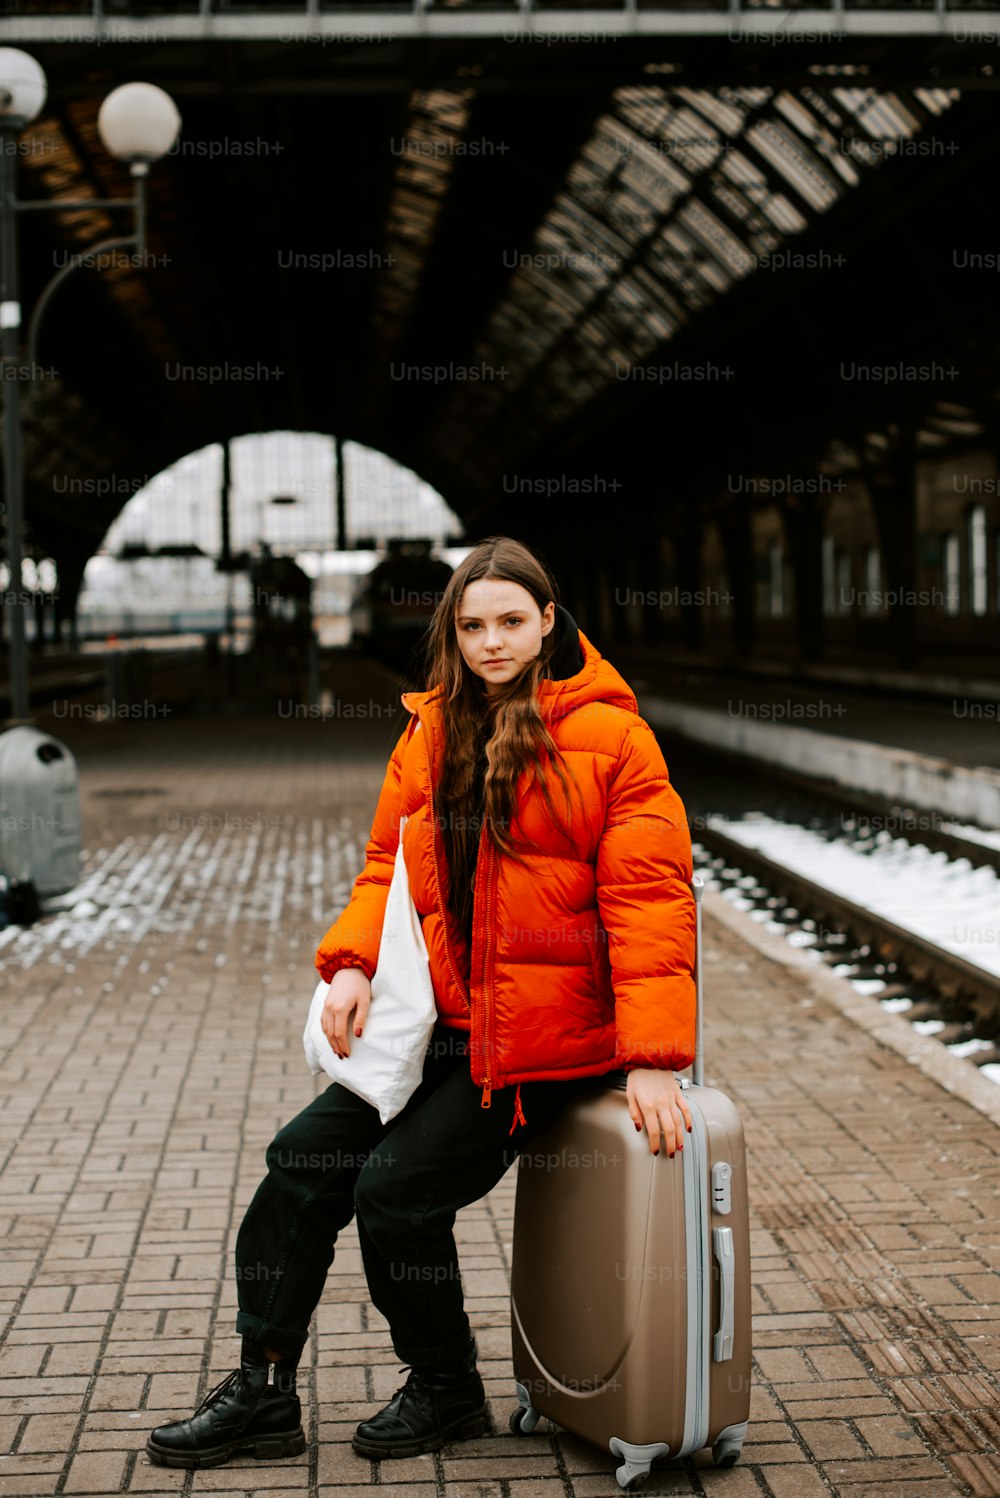 a woman in an orange jacket is sitting on a suitcase